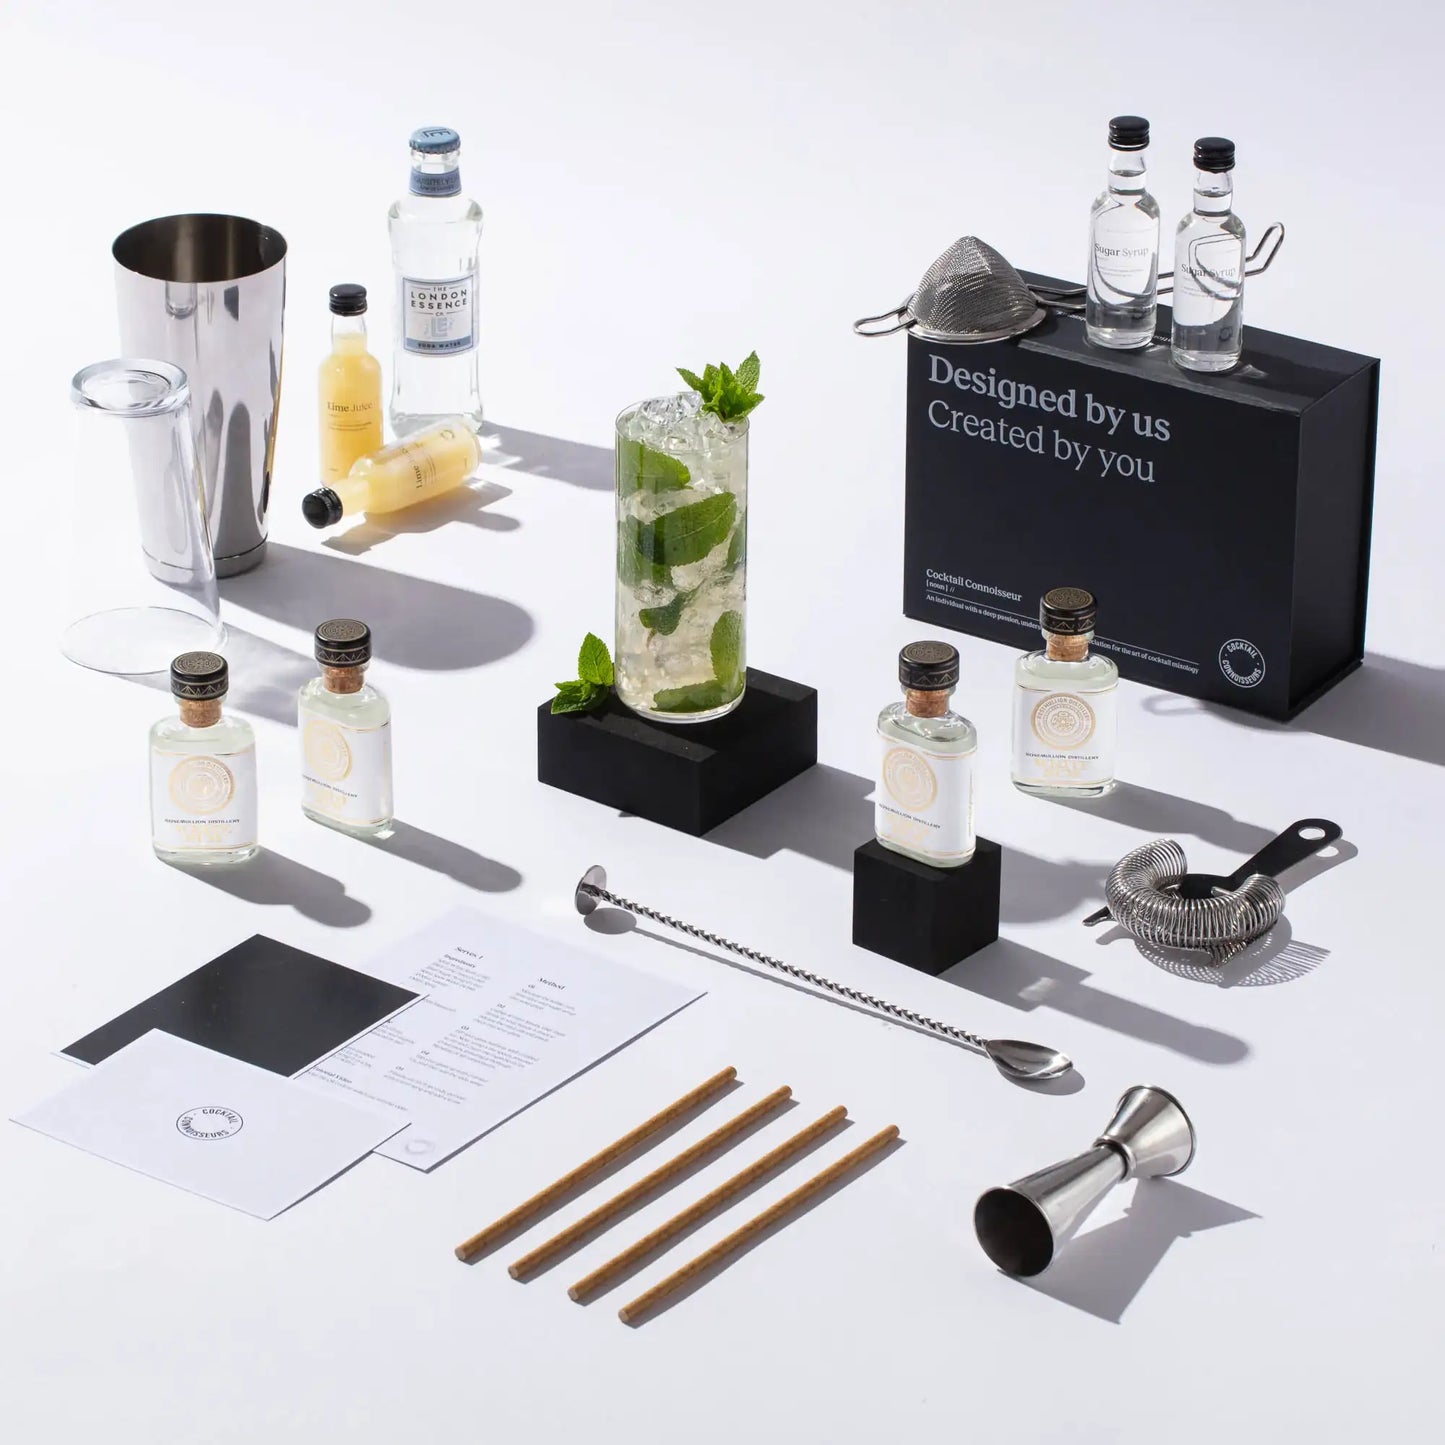 Mojito cocktail kit gift set with advanced bar equipment in gift box